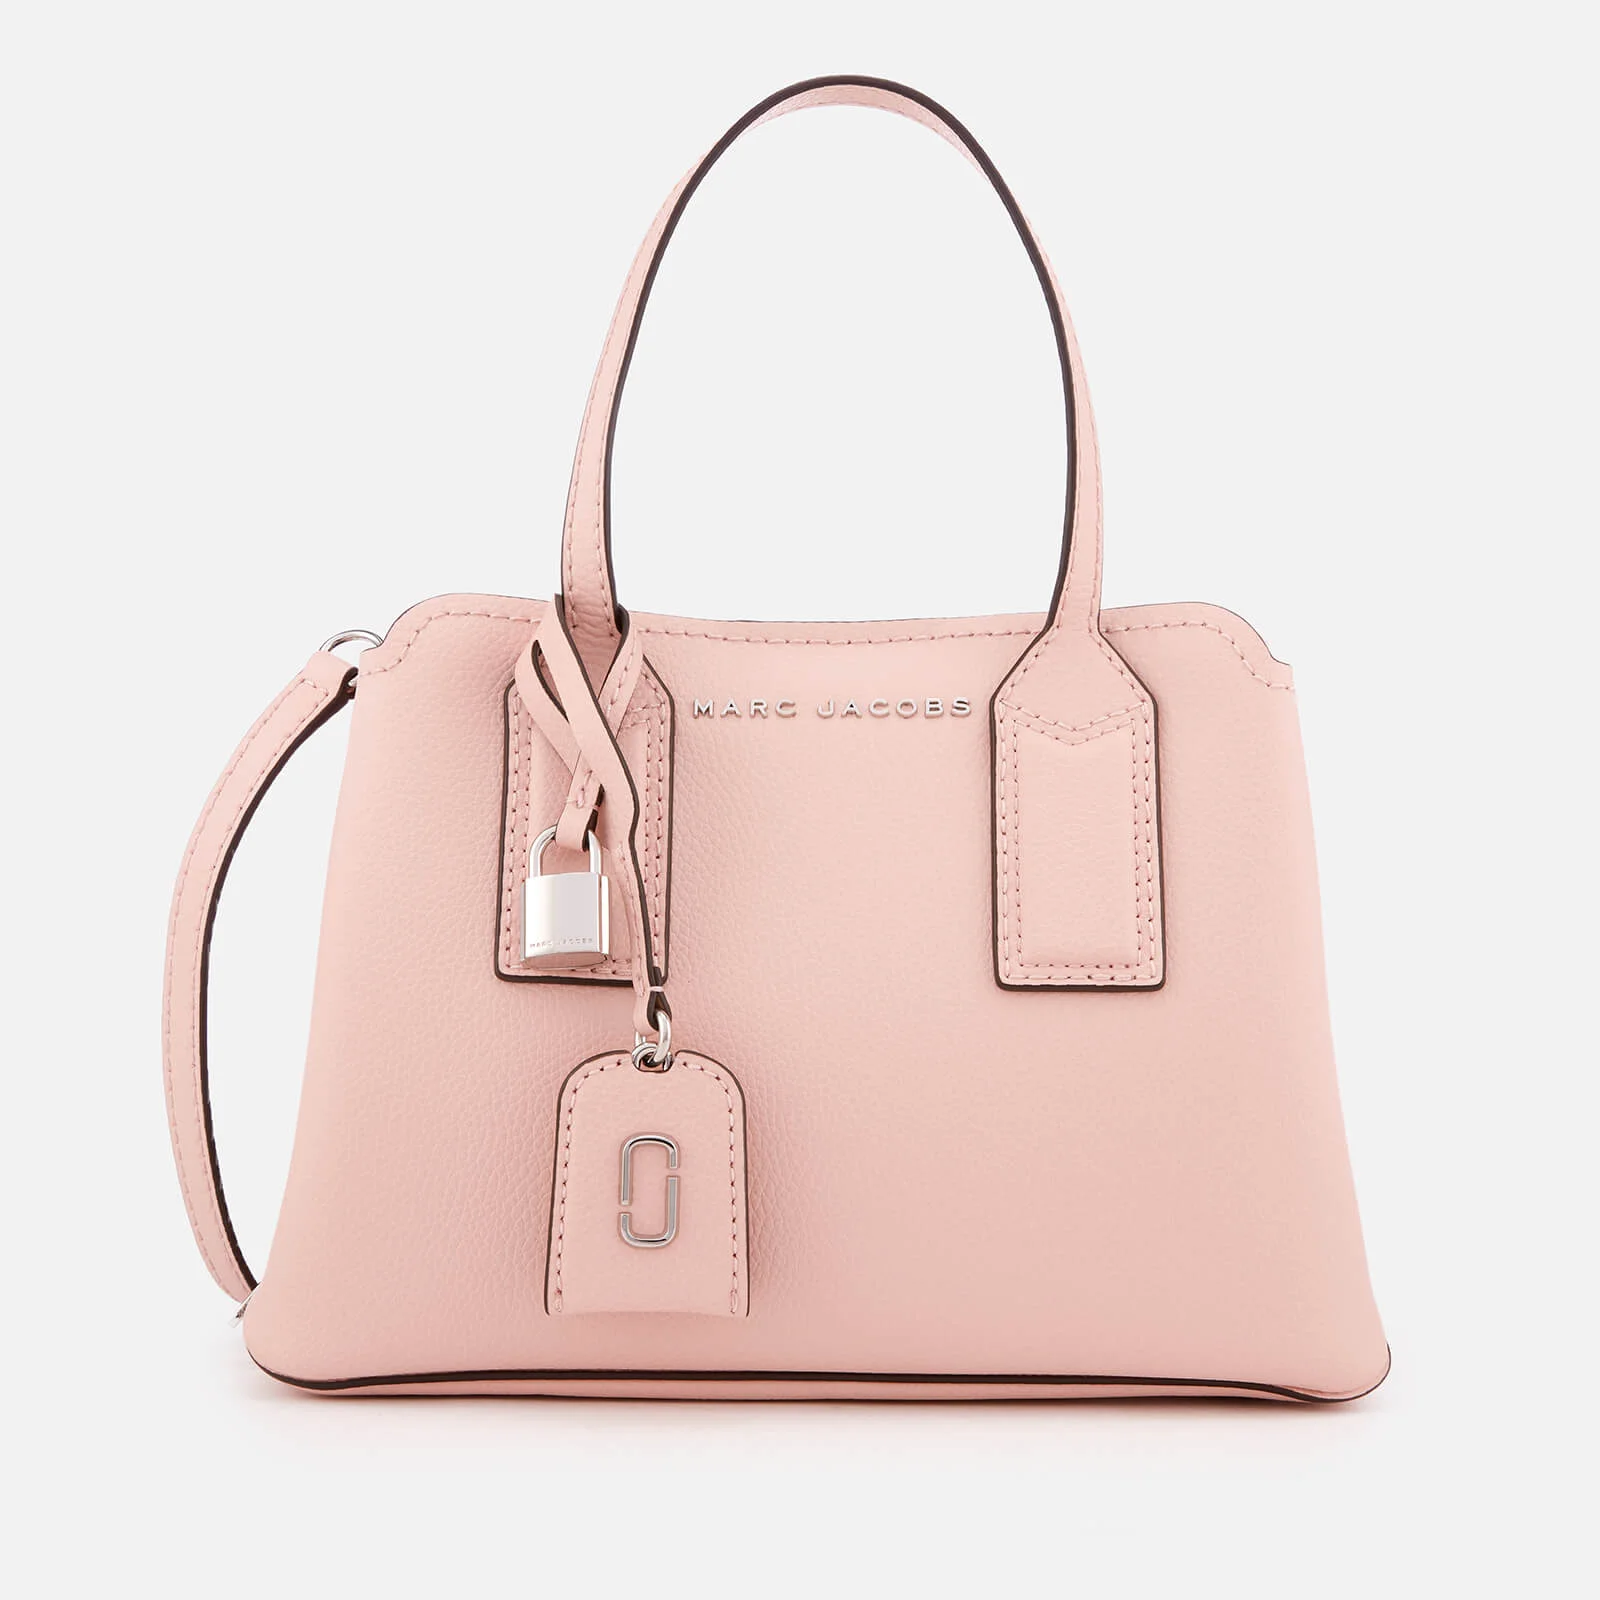 Marc Jacobs Women's The Editor Cross Body Bag - Pearl Pink Image 1